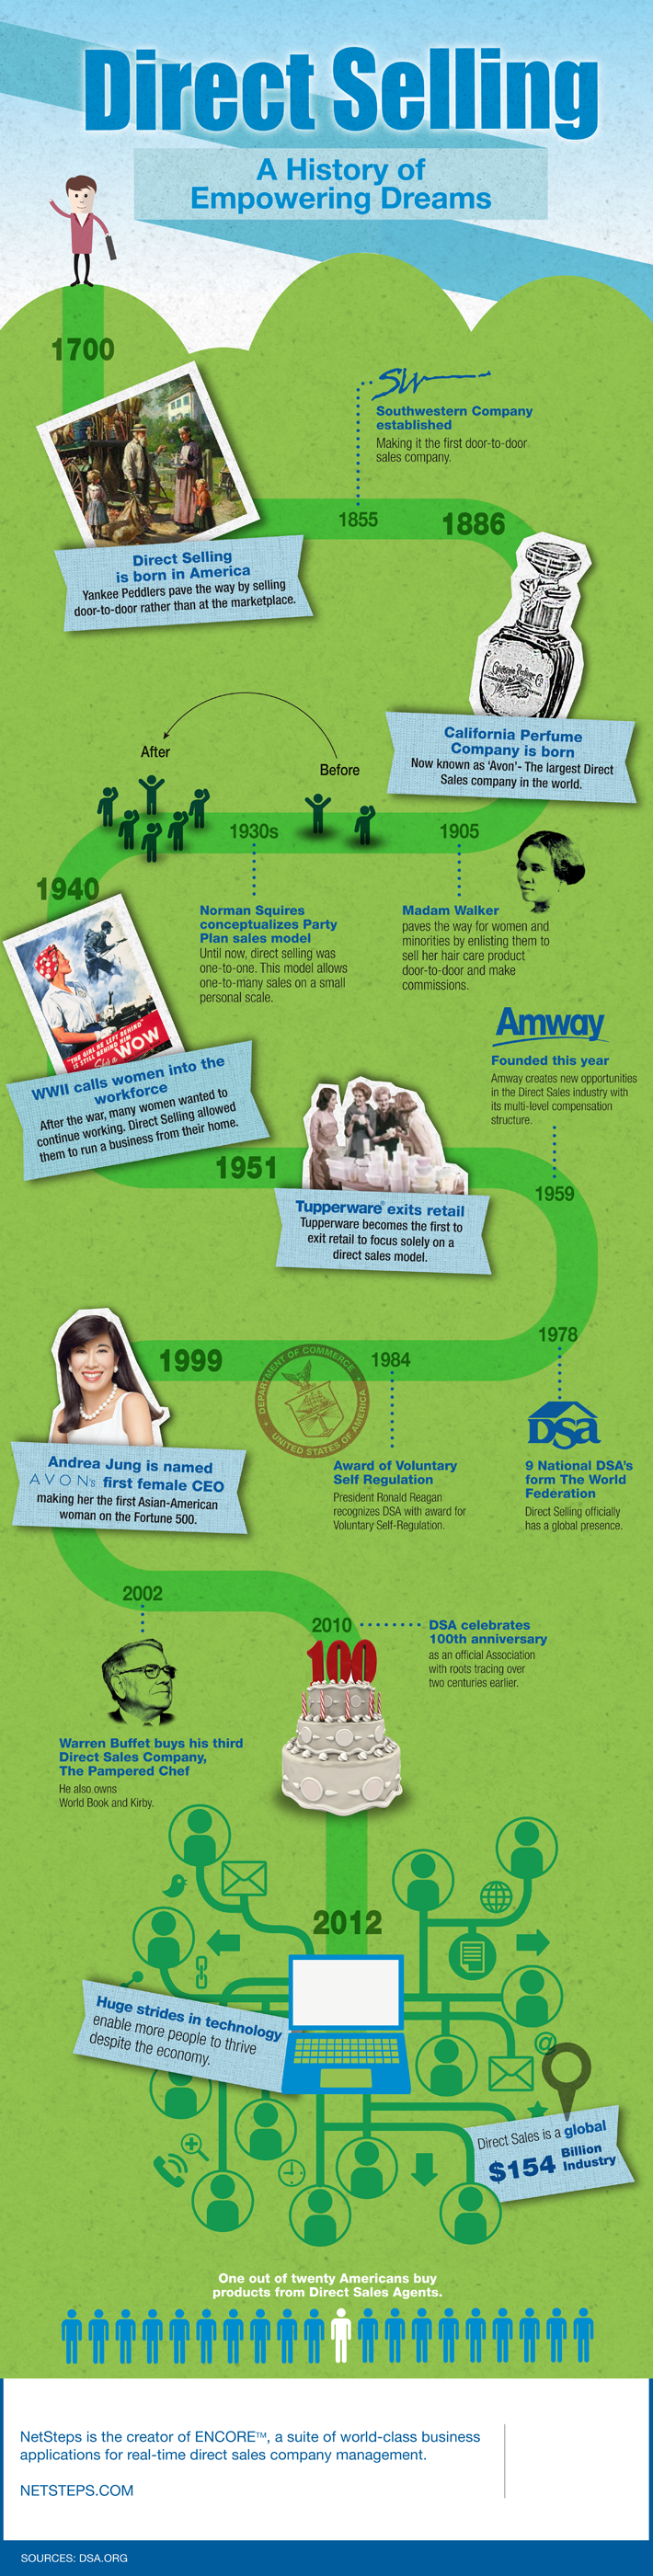 History of Direct Selling